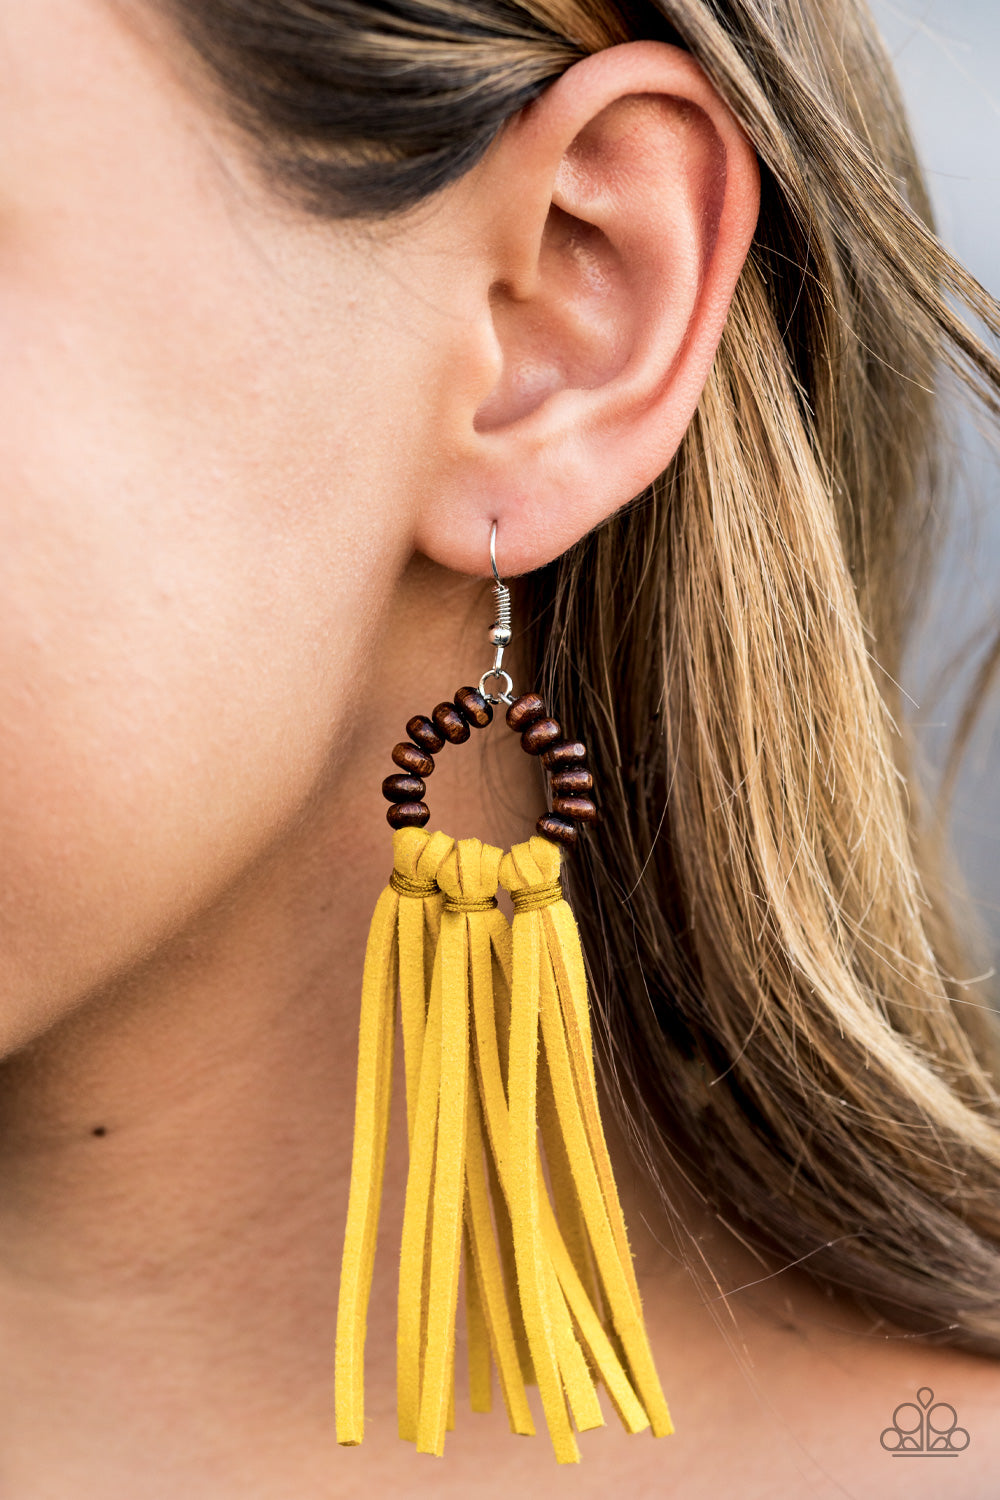 Yellow Jewelry You Can Request We Find For You